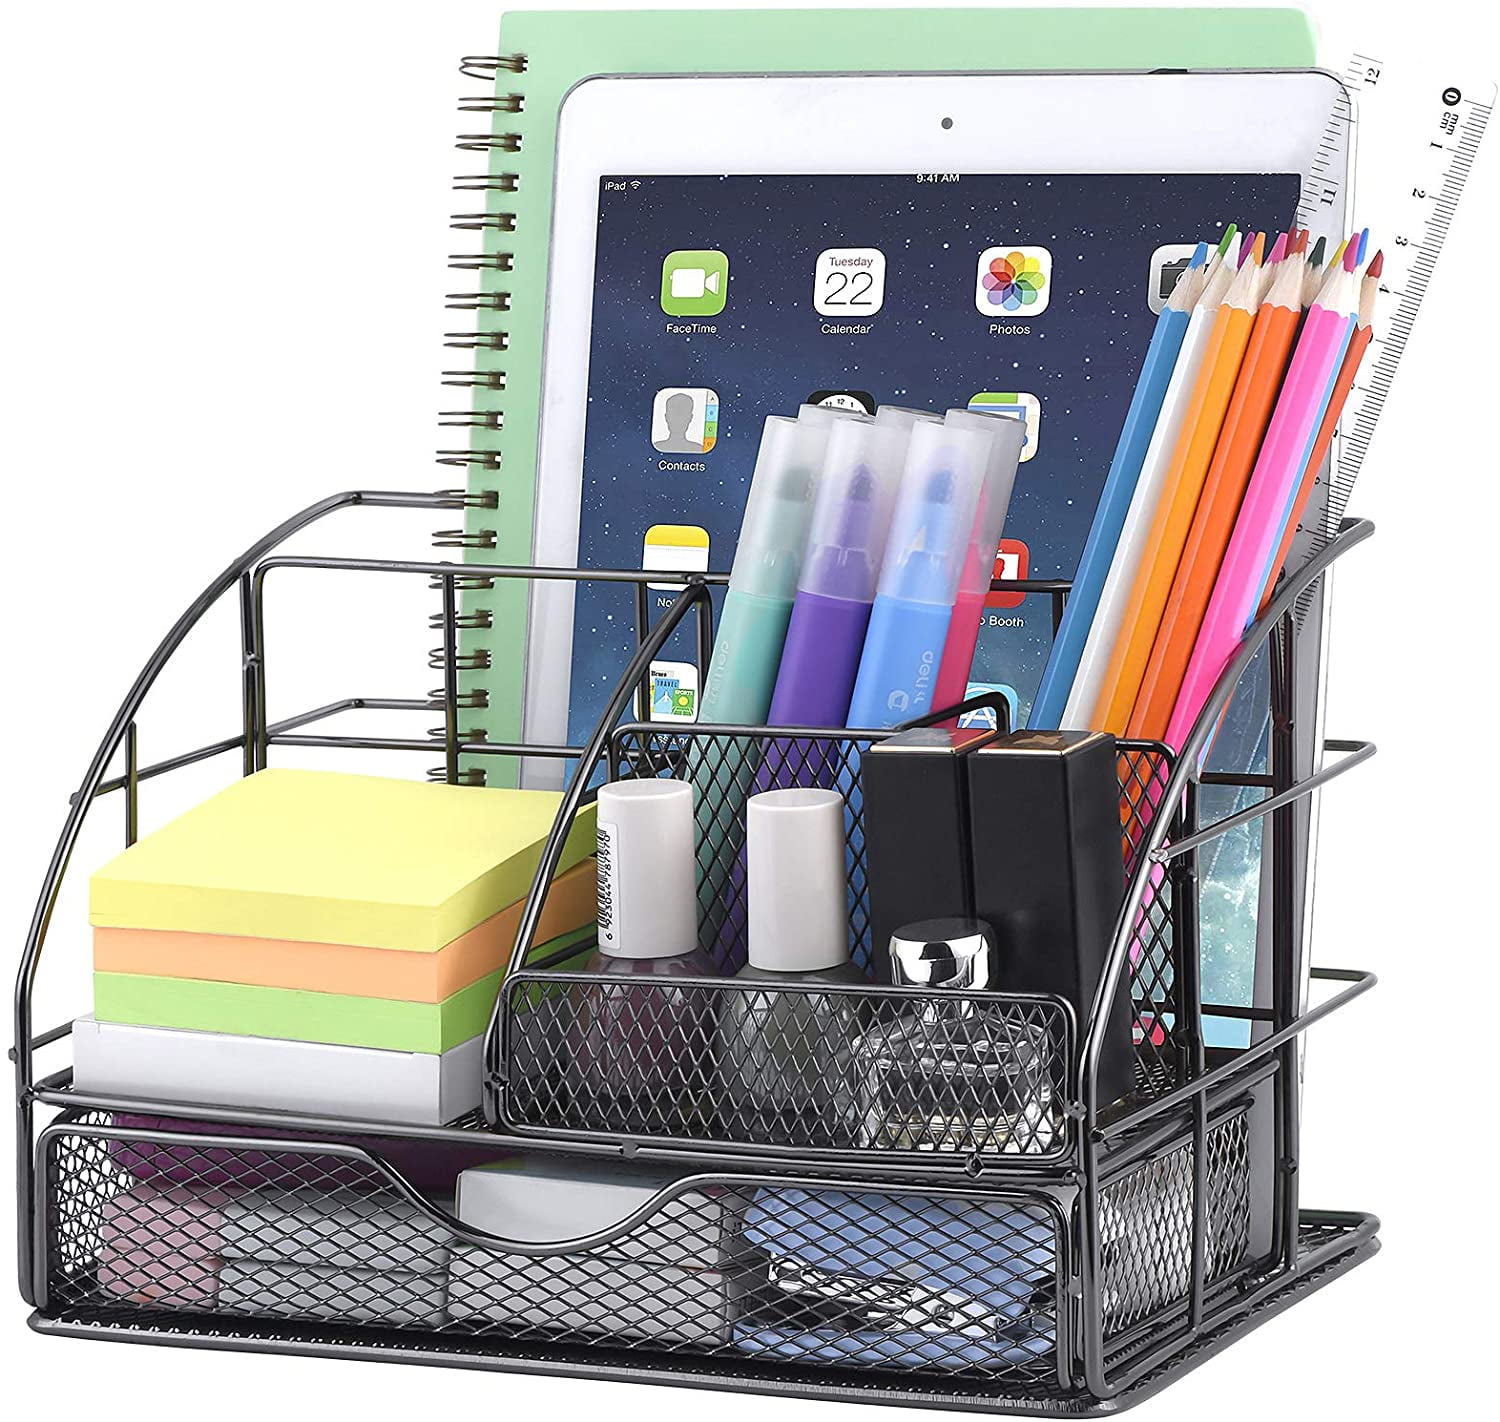 Black Greenco Mesh Office Supplies Desk Organizer with Note Pad Holder Five Pack GRC4778 